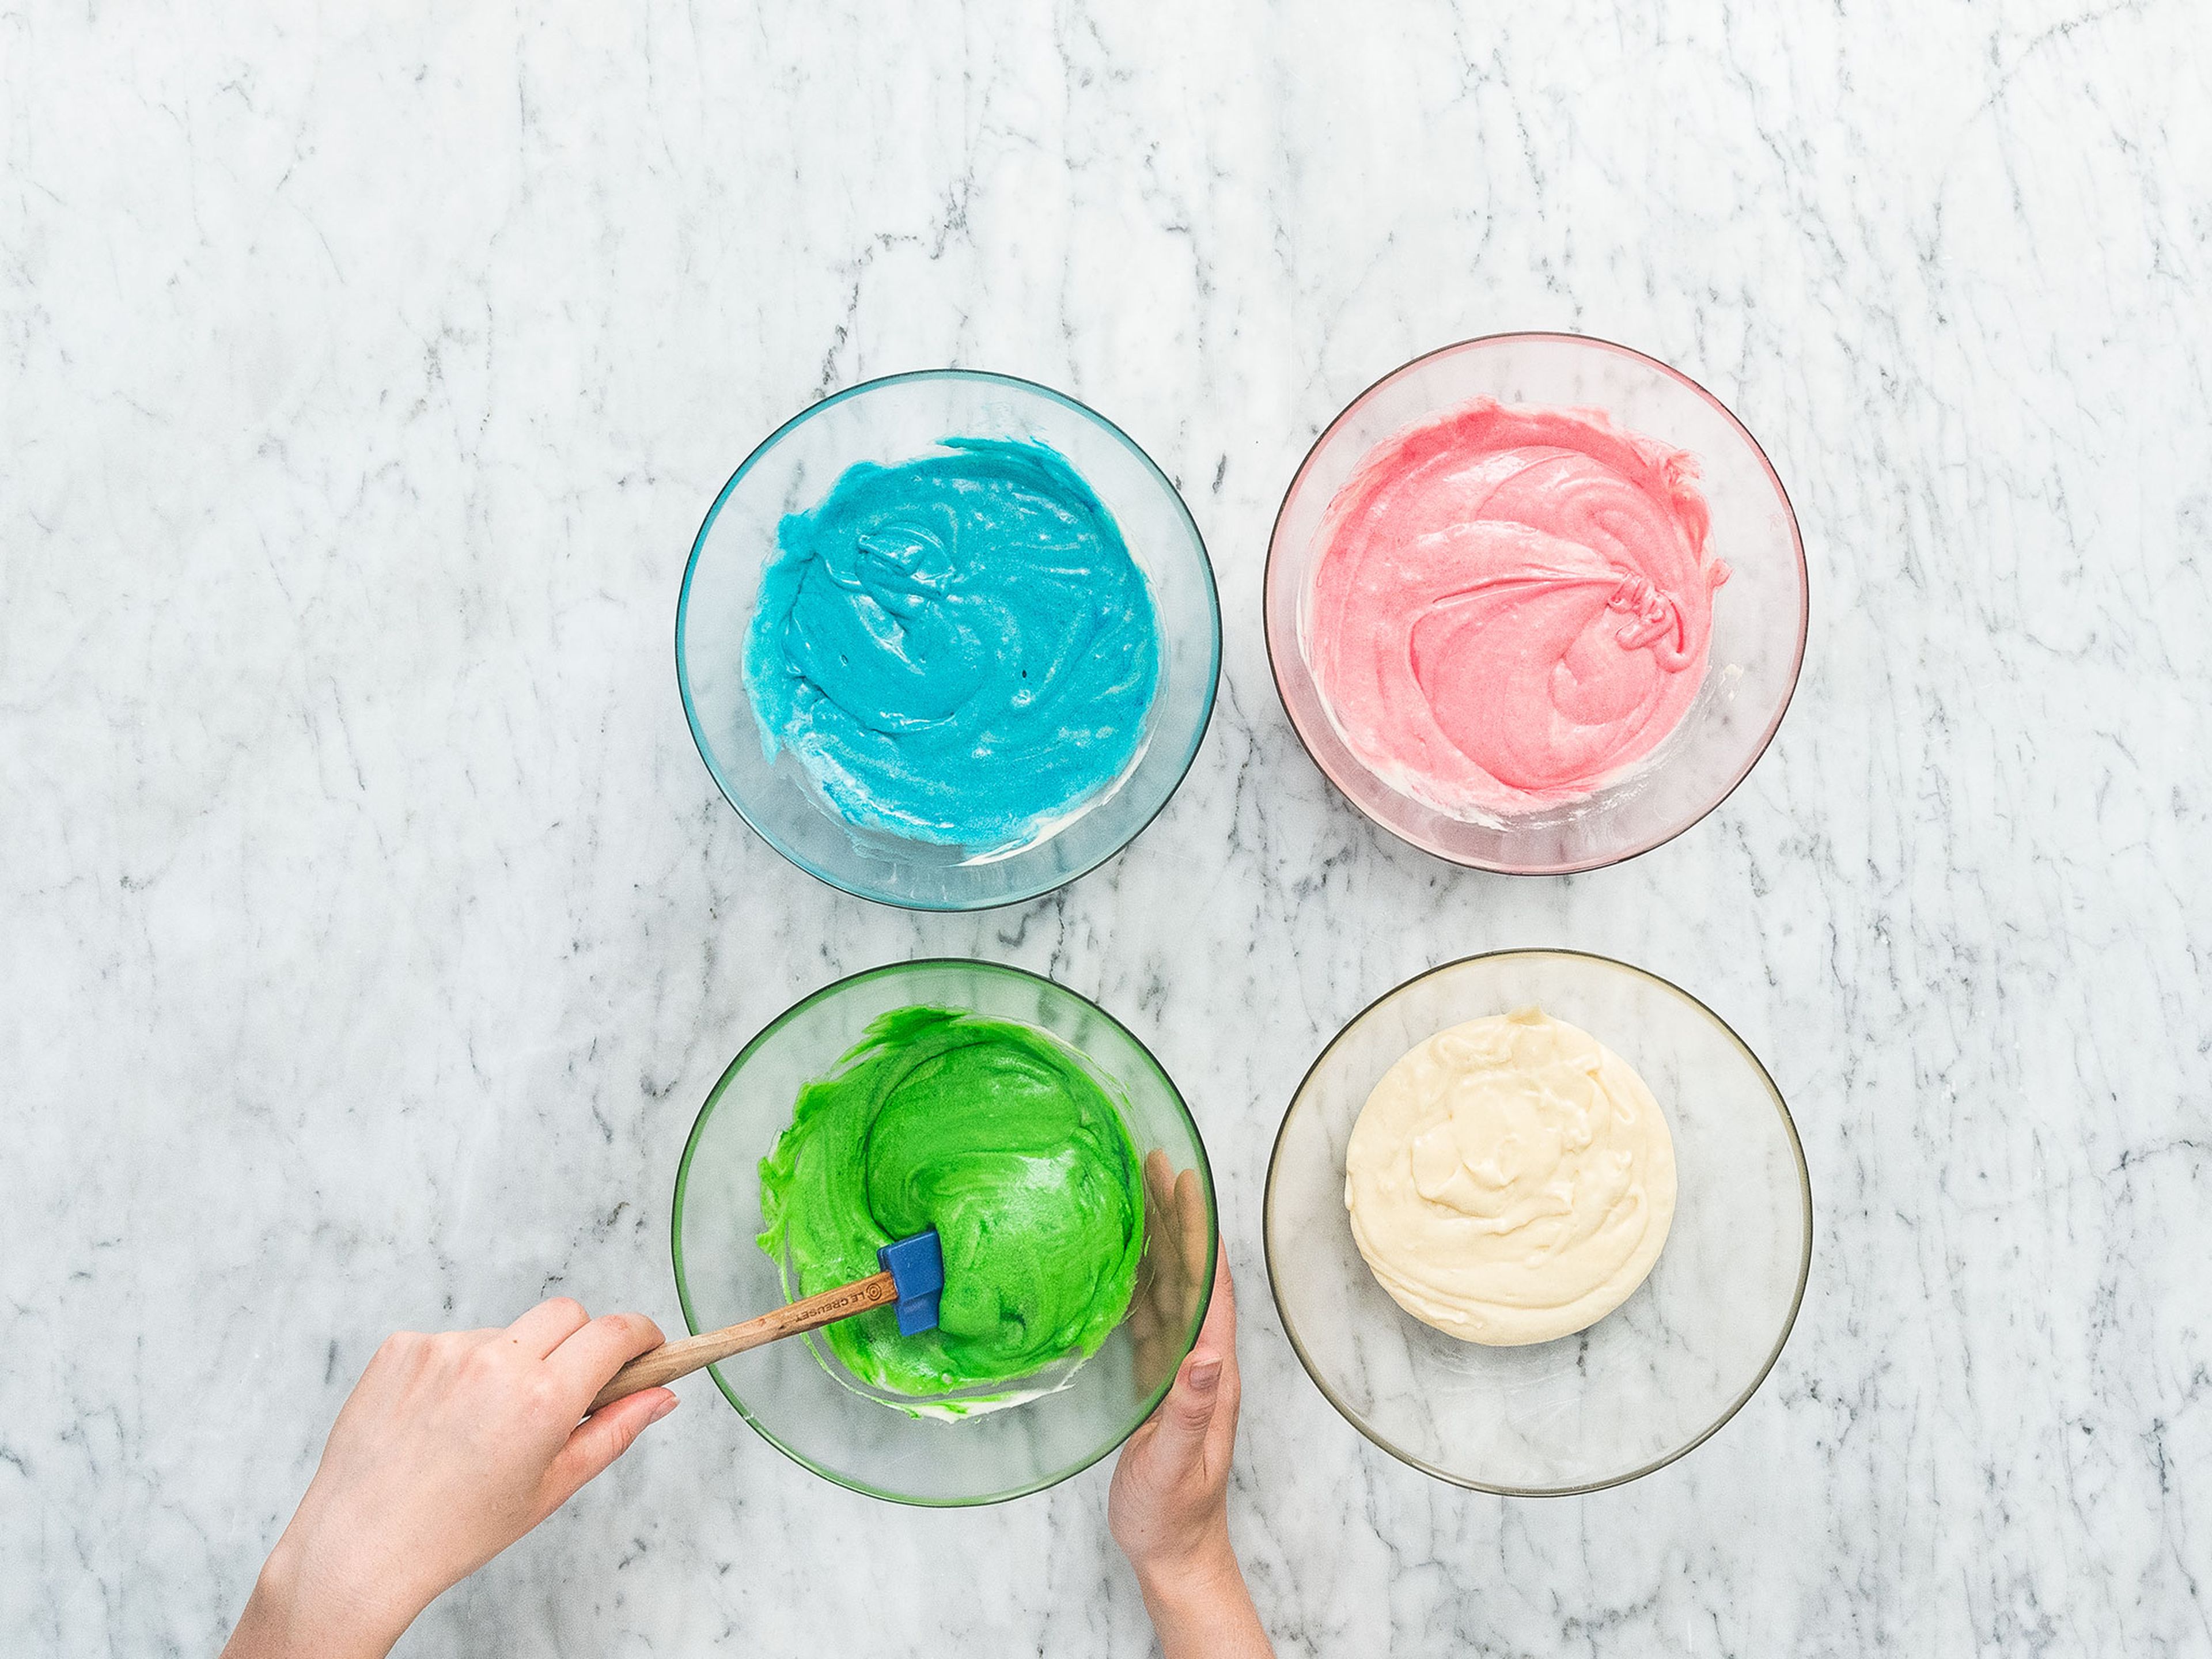 Divide batter equally into four bowls. Add red food coloring to the first bowl, green food coloring to the second bowl, blue food coloring to the third bowl, and leave the fourth one plain.